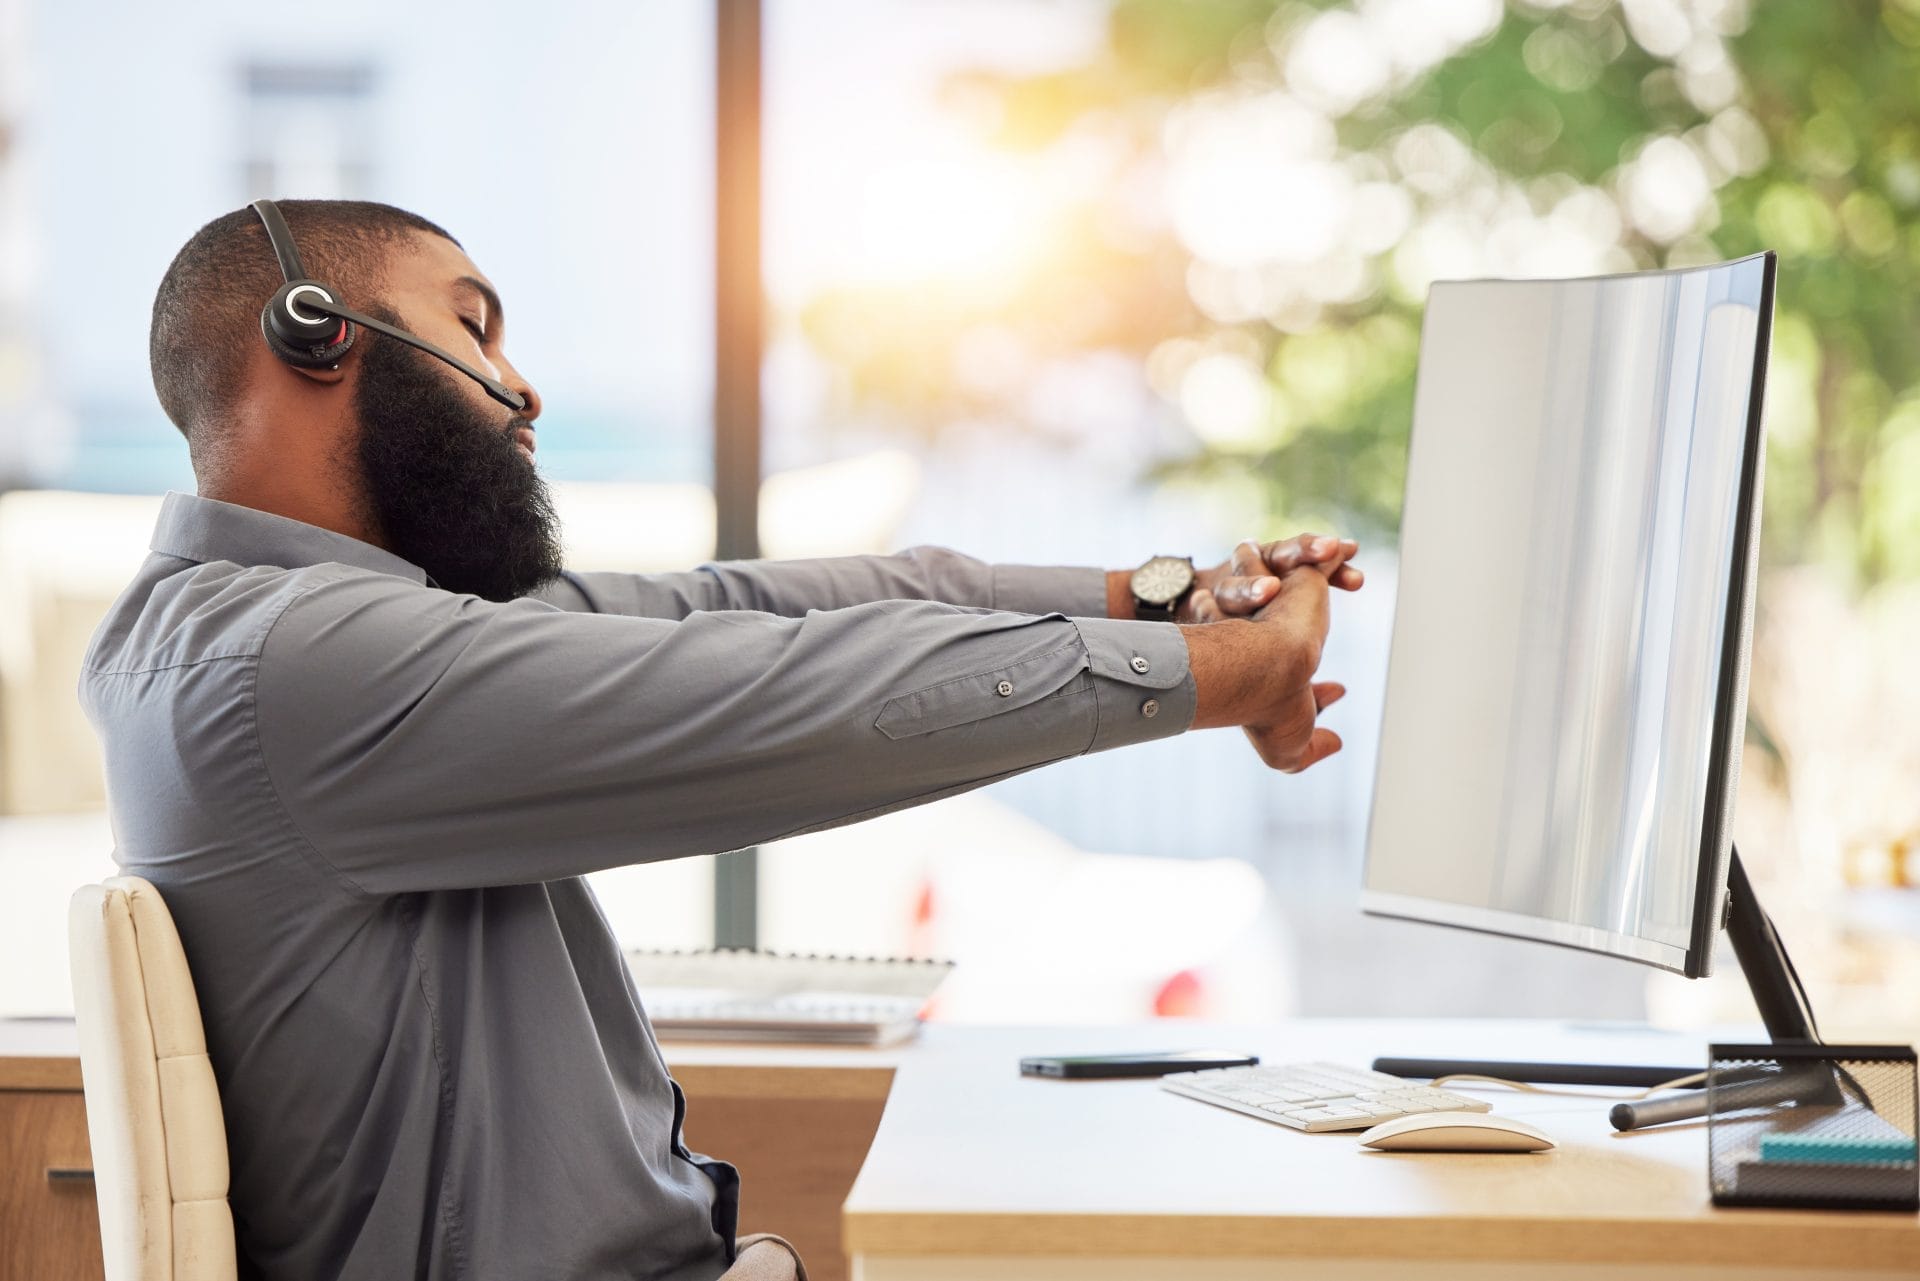 Blog: Ergonomics In The Workplace